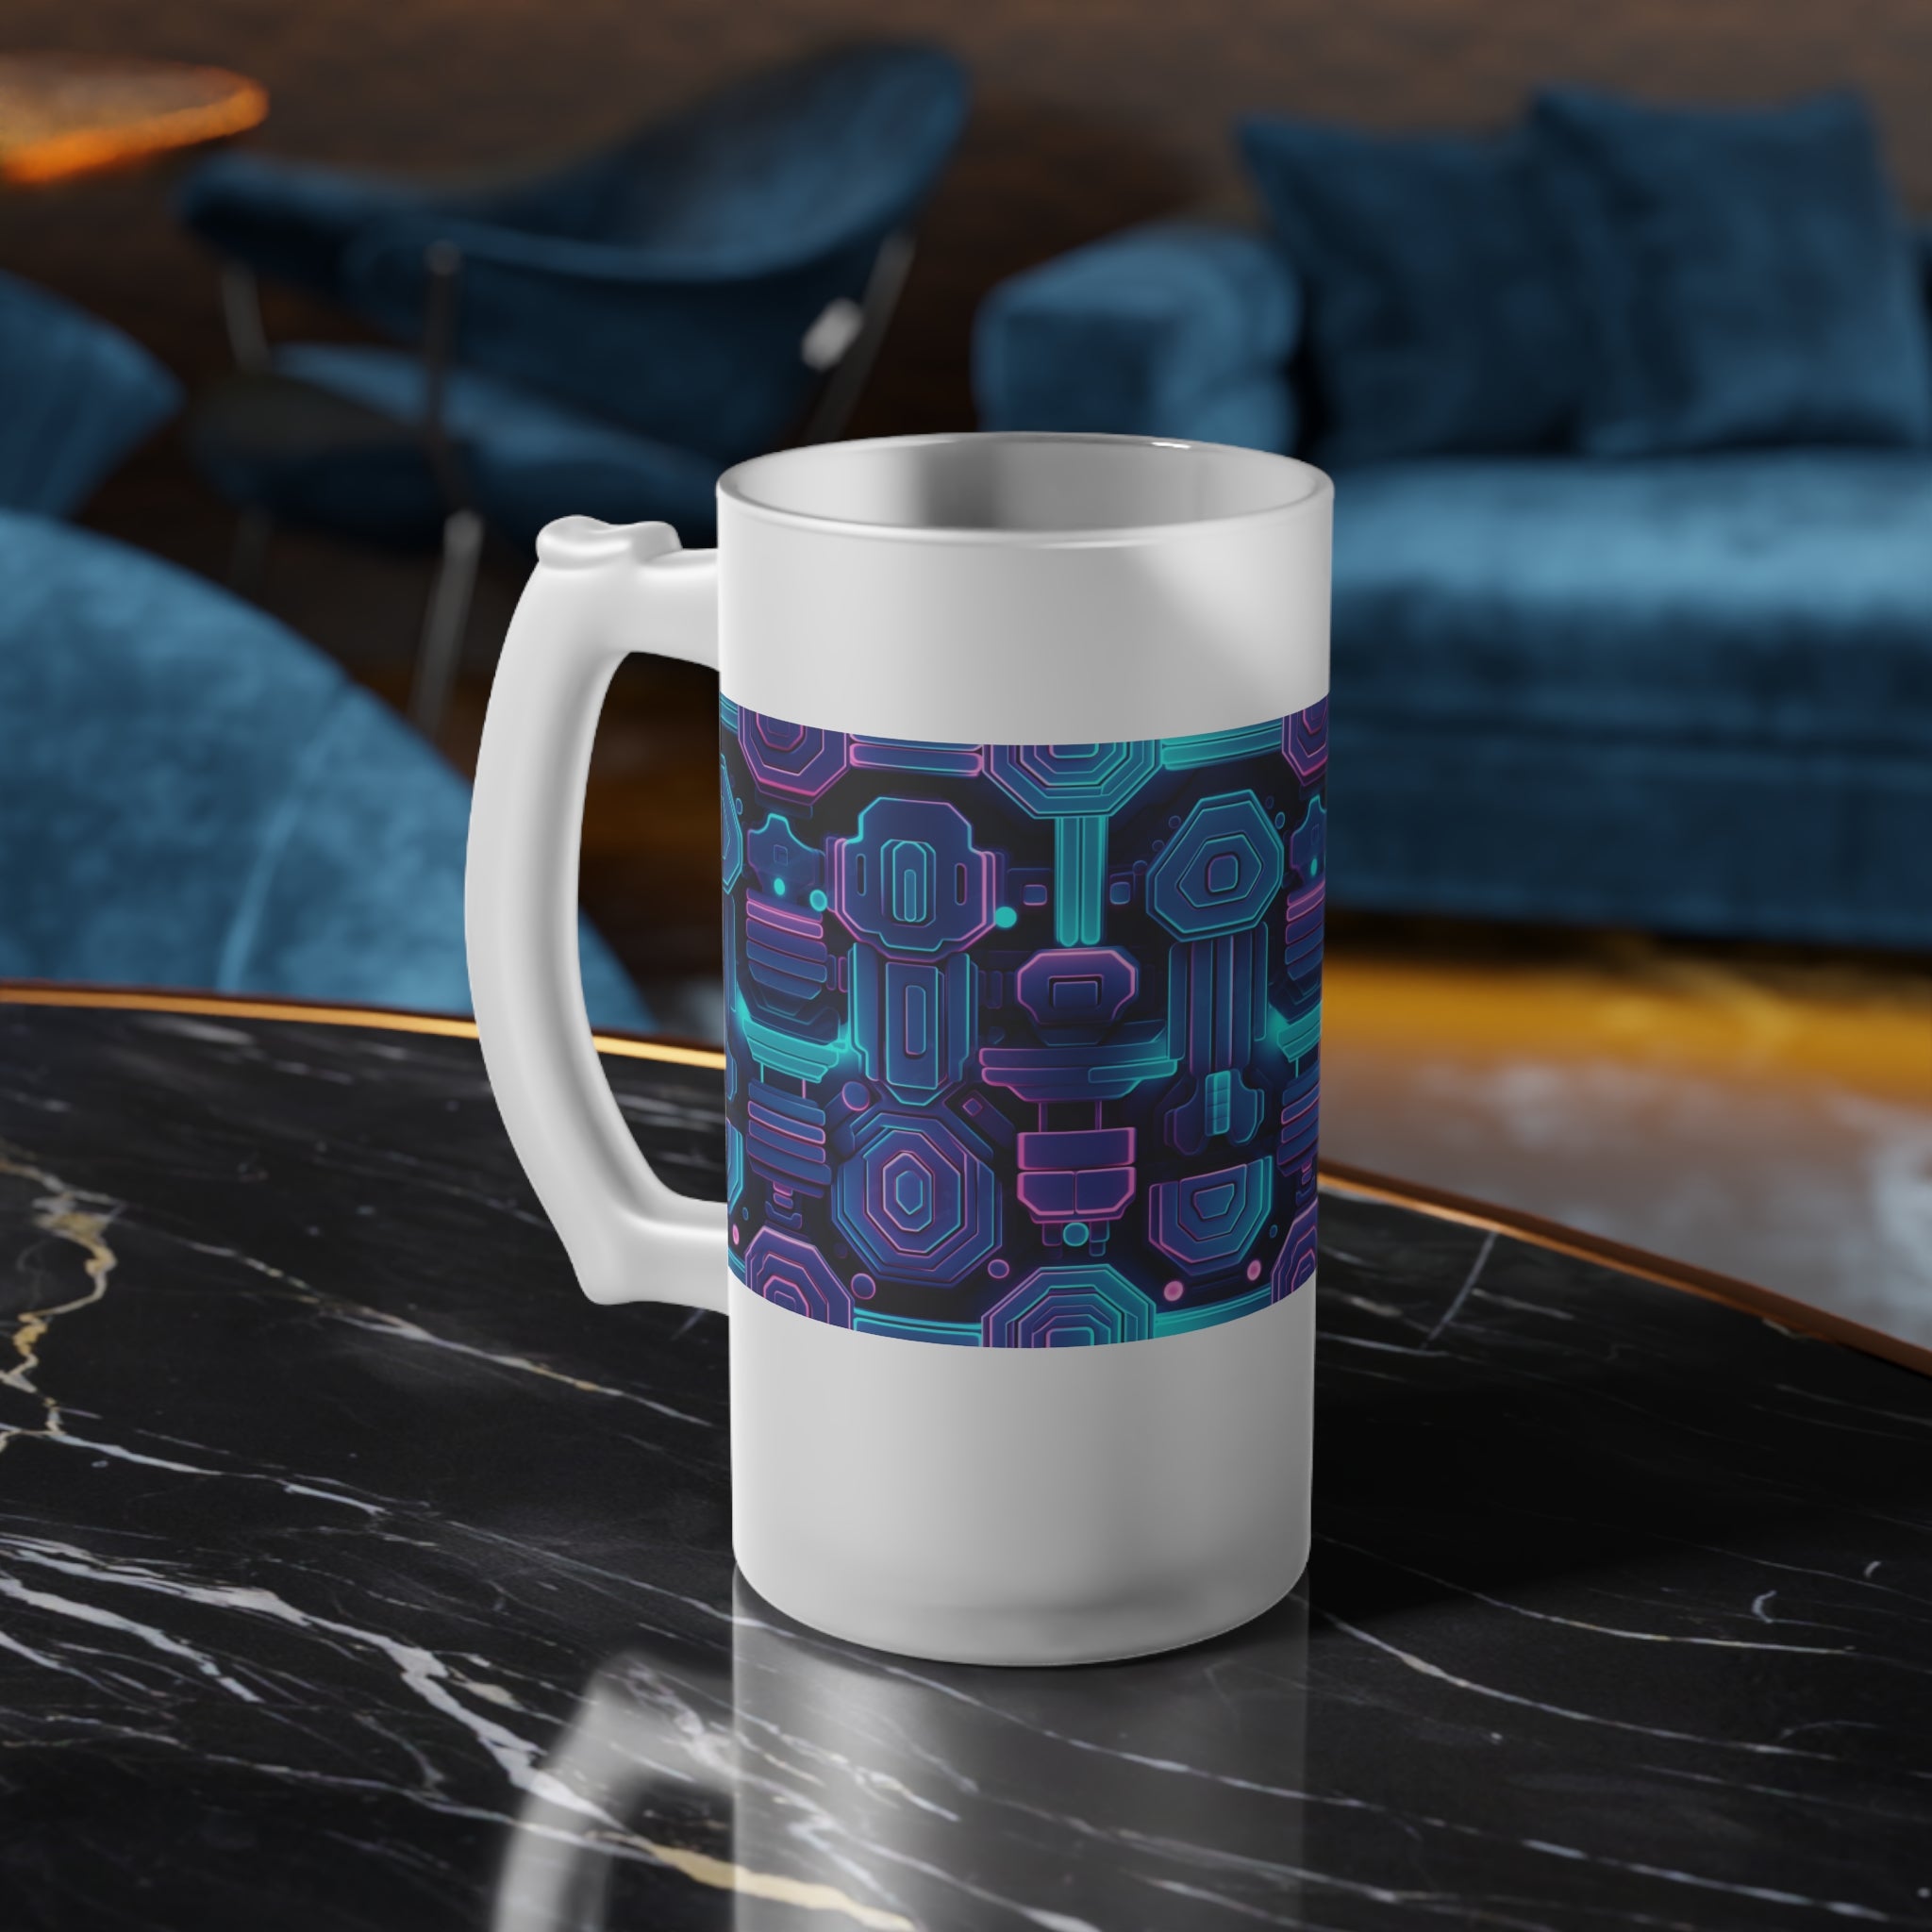 Frosted Glass Beer Mug (AOP) - Seamless Futuristic Designs 02